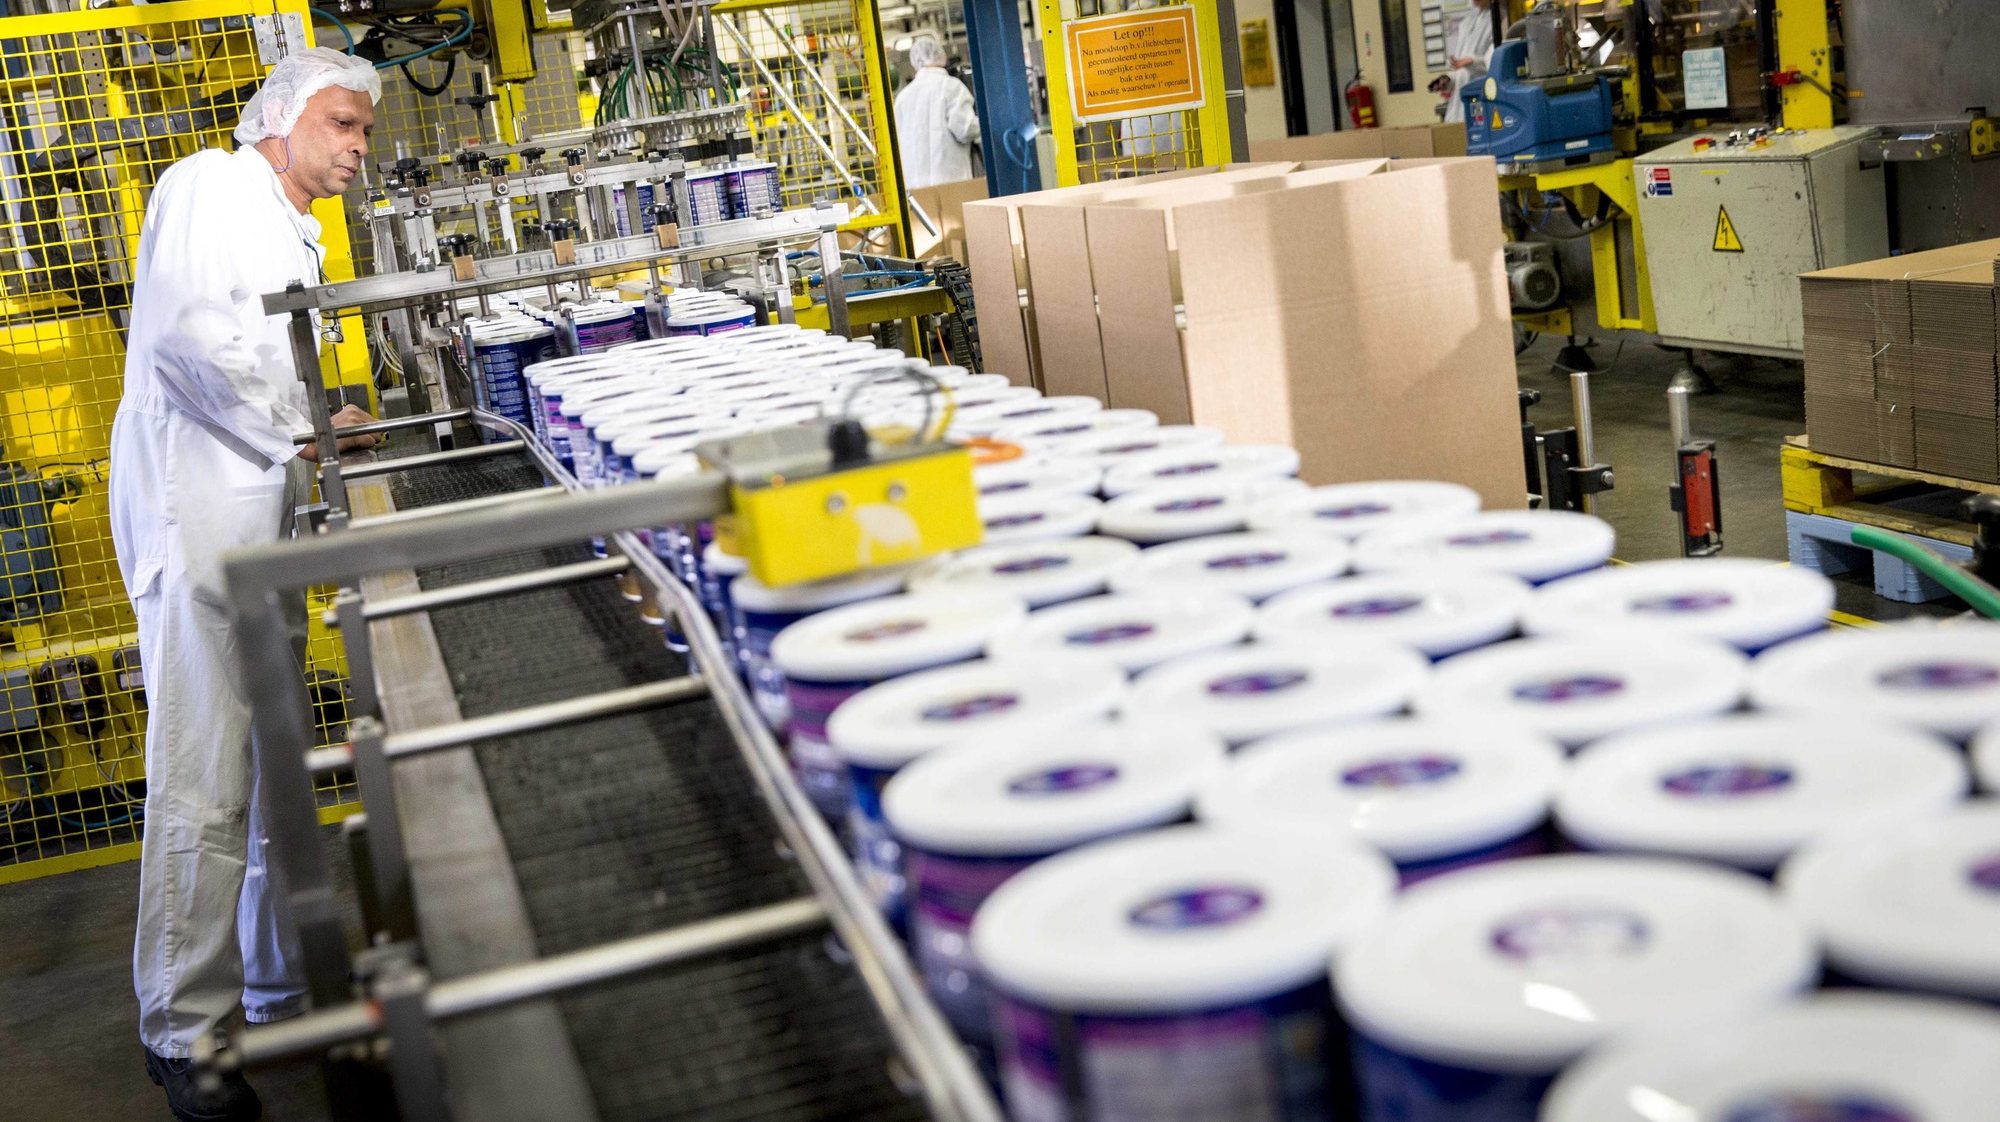 epa05051998 Aptamil baby formula cans at a production line of Danone Nutricia Early Life Nutrition division, in Cuijk, The Netherlands, 02 December 2015. French company Danone is building a new factory for the production of baby food in the Dutch city of Cuijk, with an investment of 240 million euros.  EPA/JERRY LAMPEN